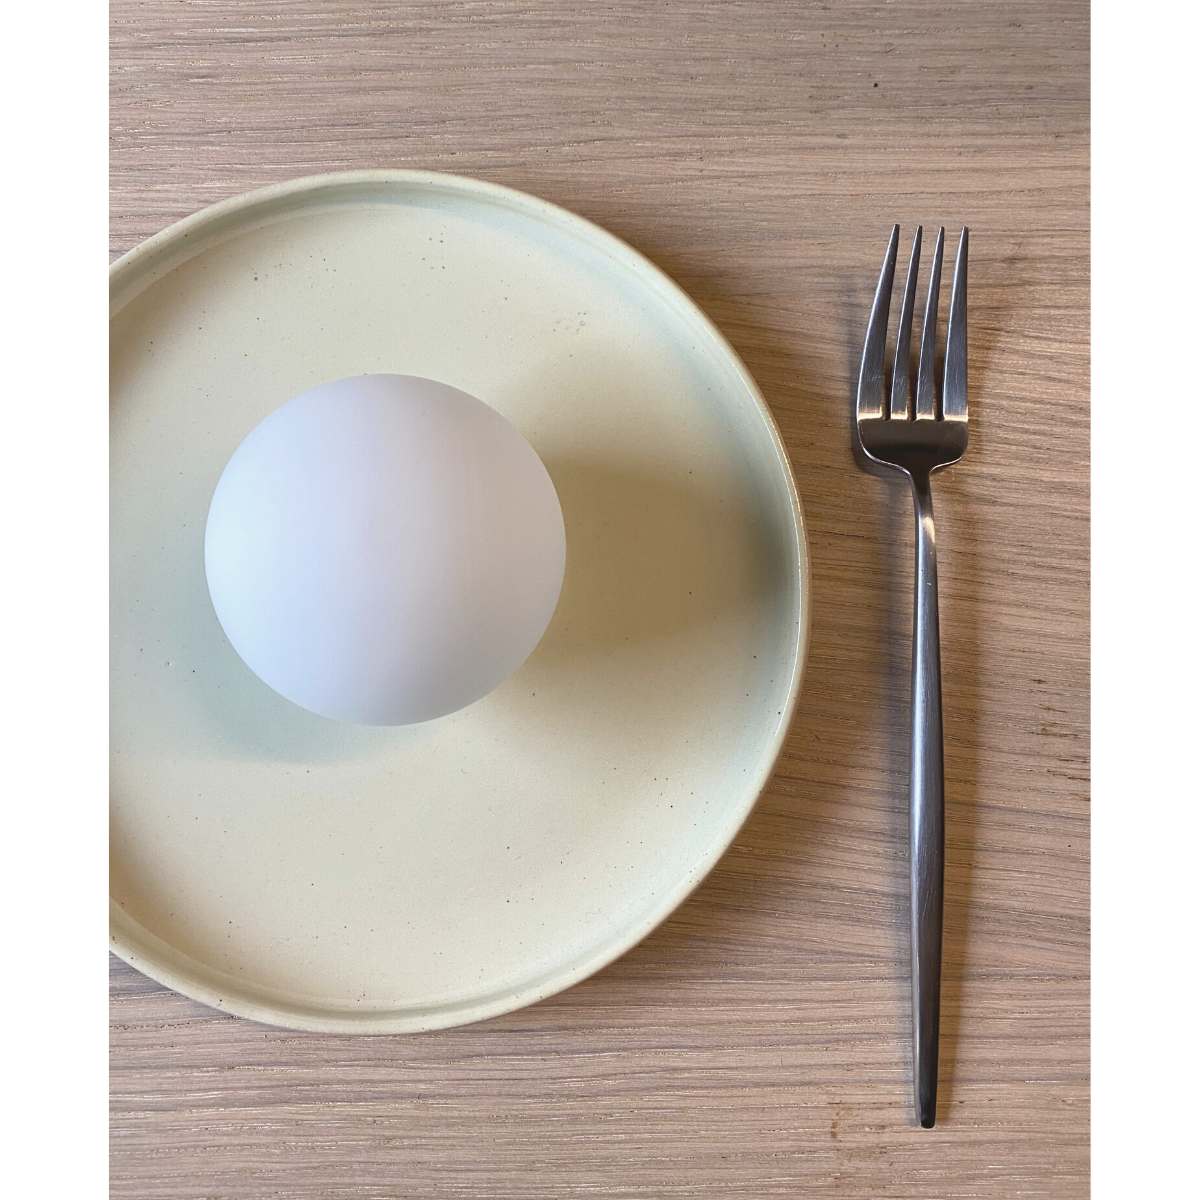 Snowball shade on a plate